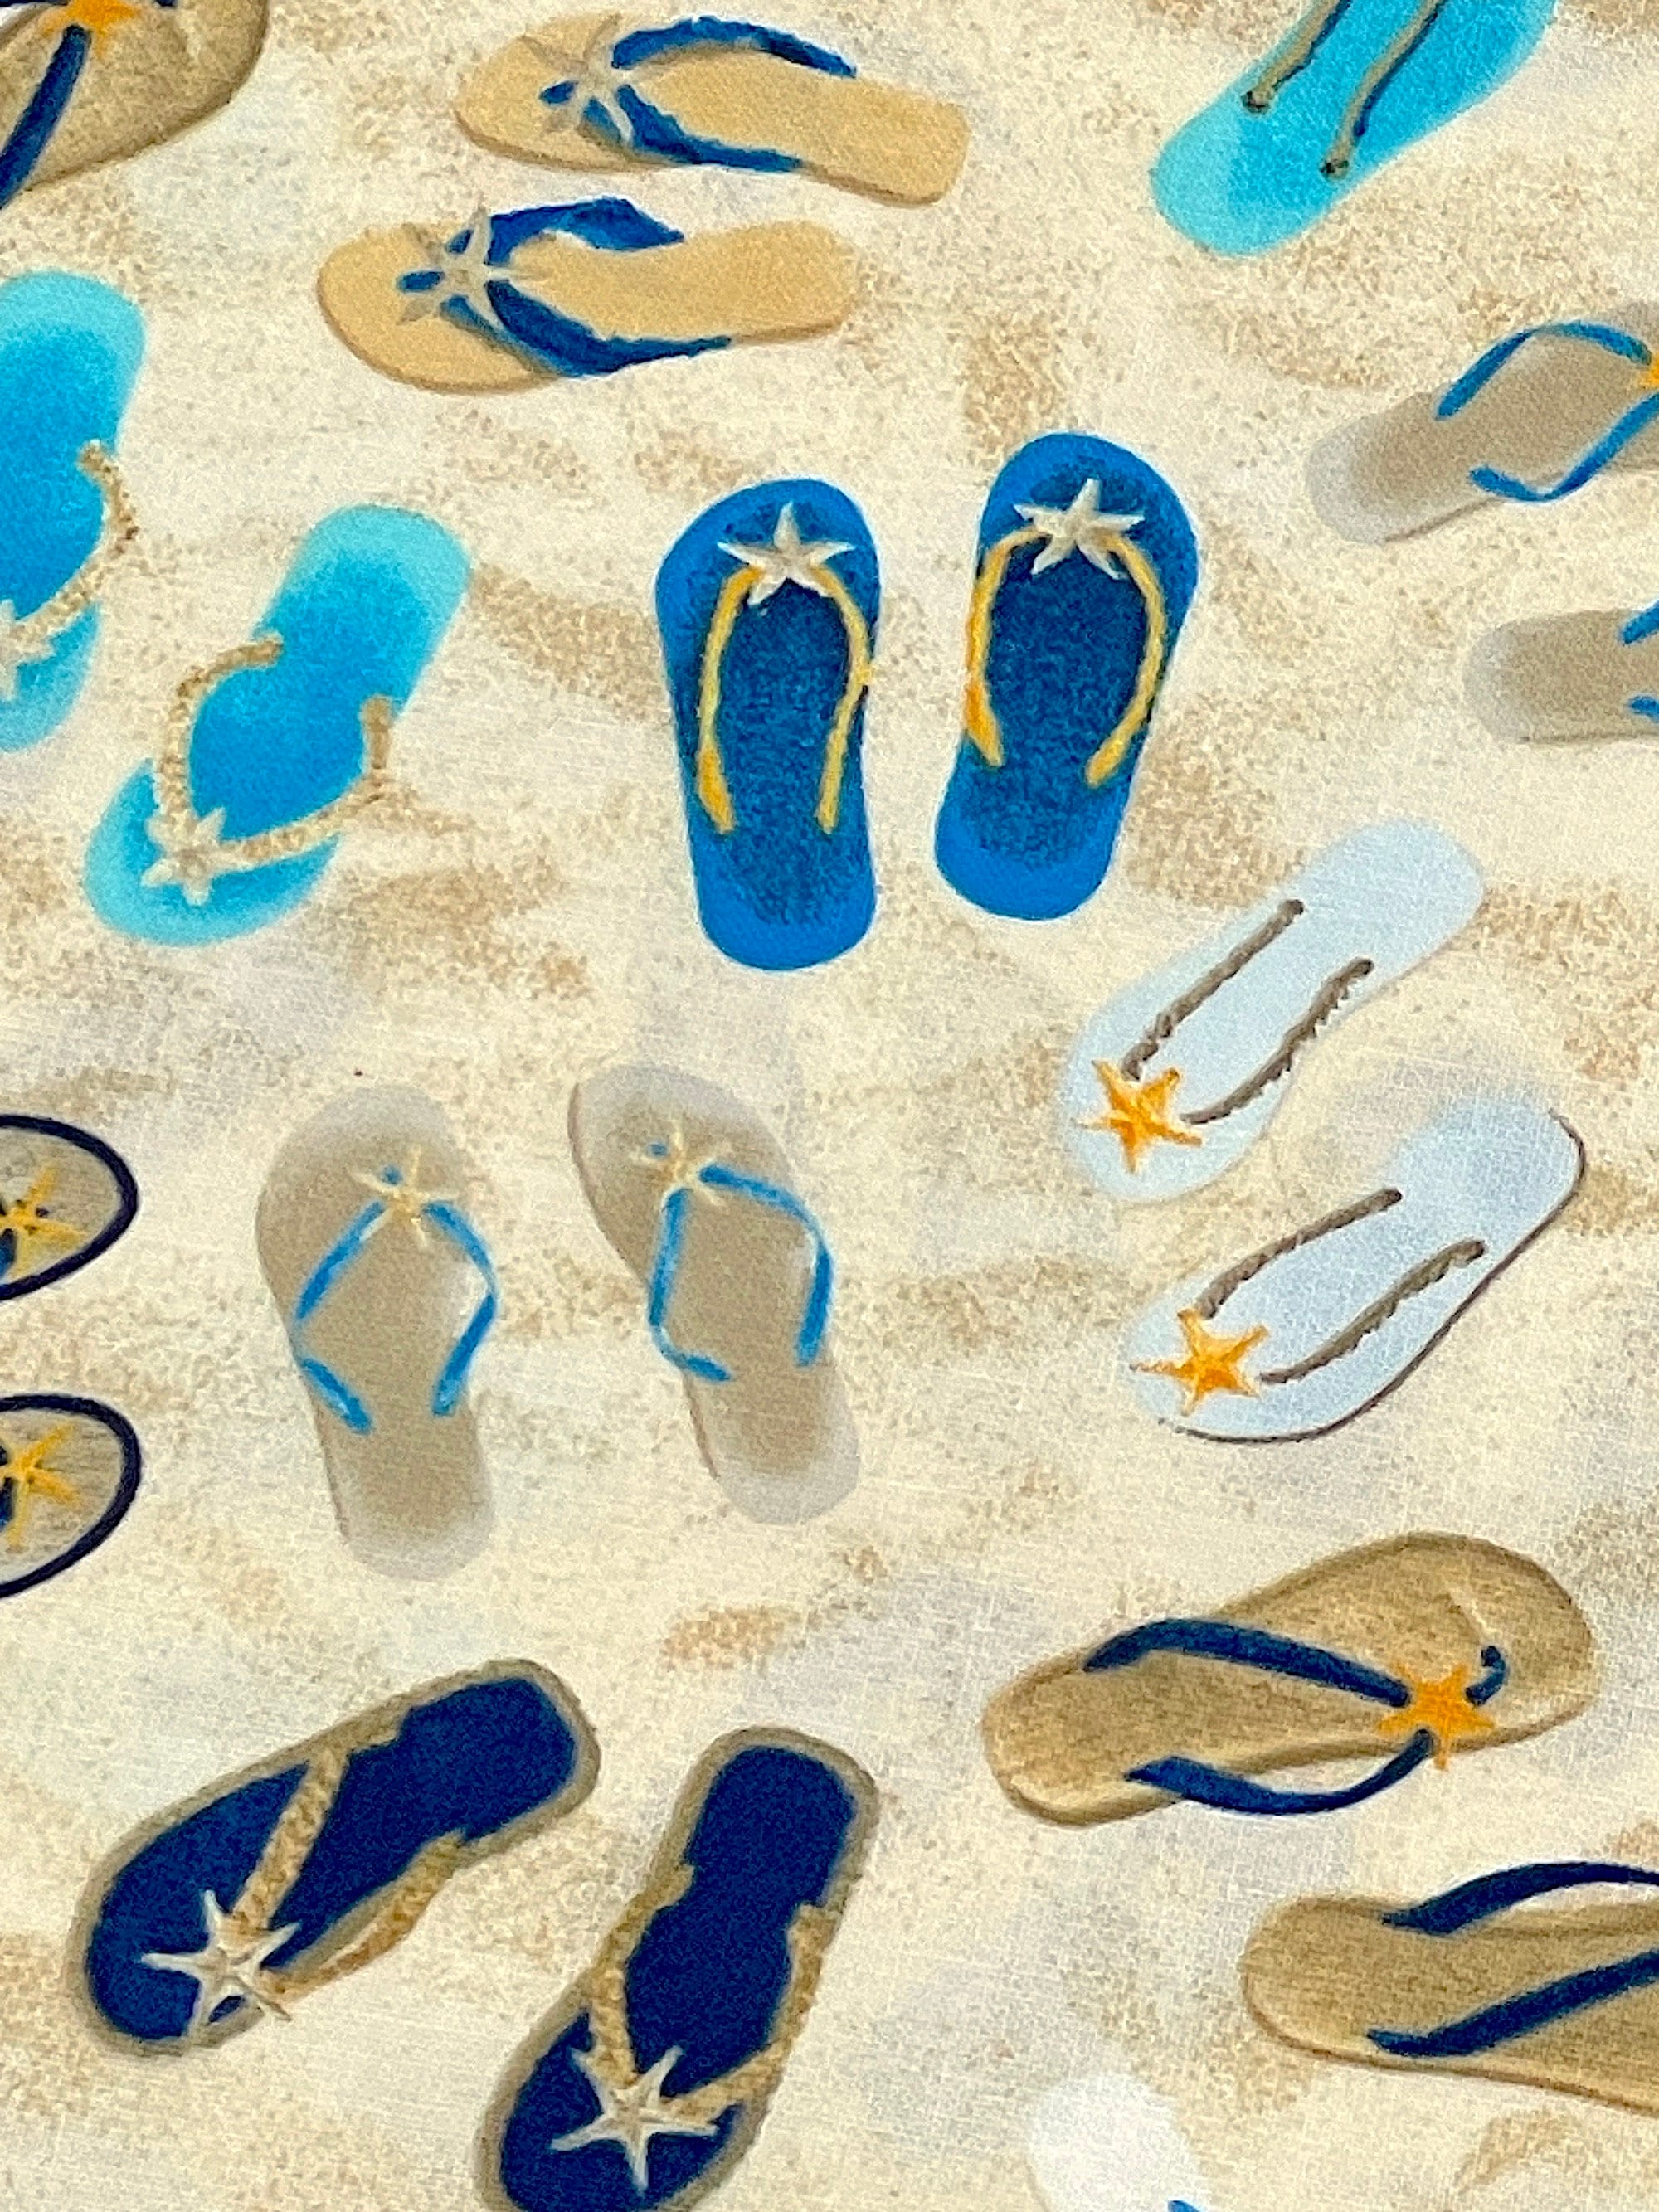 Close up of flip flops on the sand.